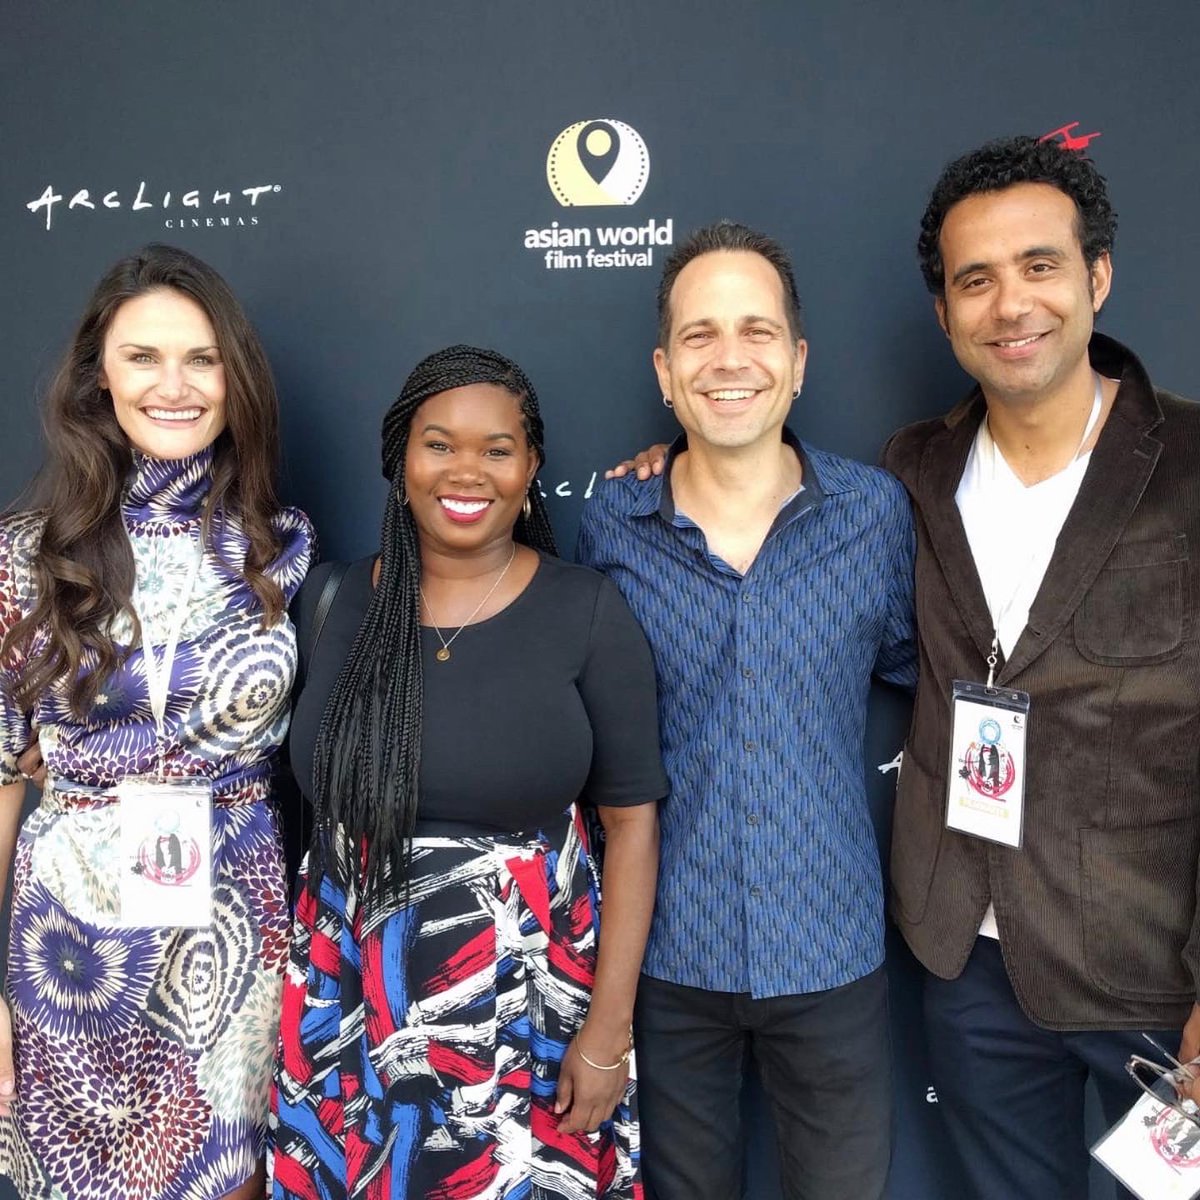 Pics from yesterday’s LA premiere of ‘The Illegal’ with the cast and crew at the Asian World Film Festival. #asianfilmfestival #theillegalmovie